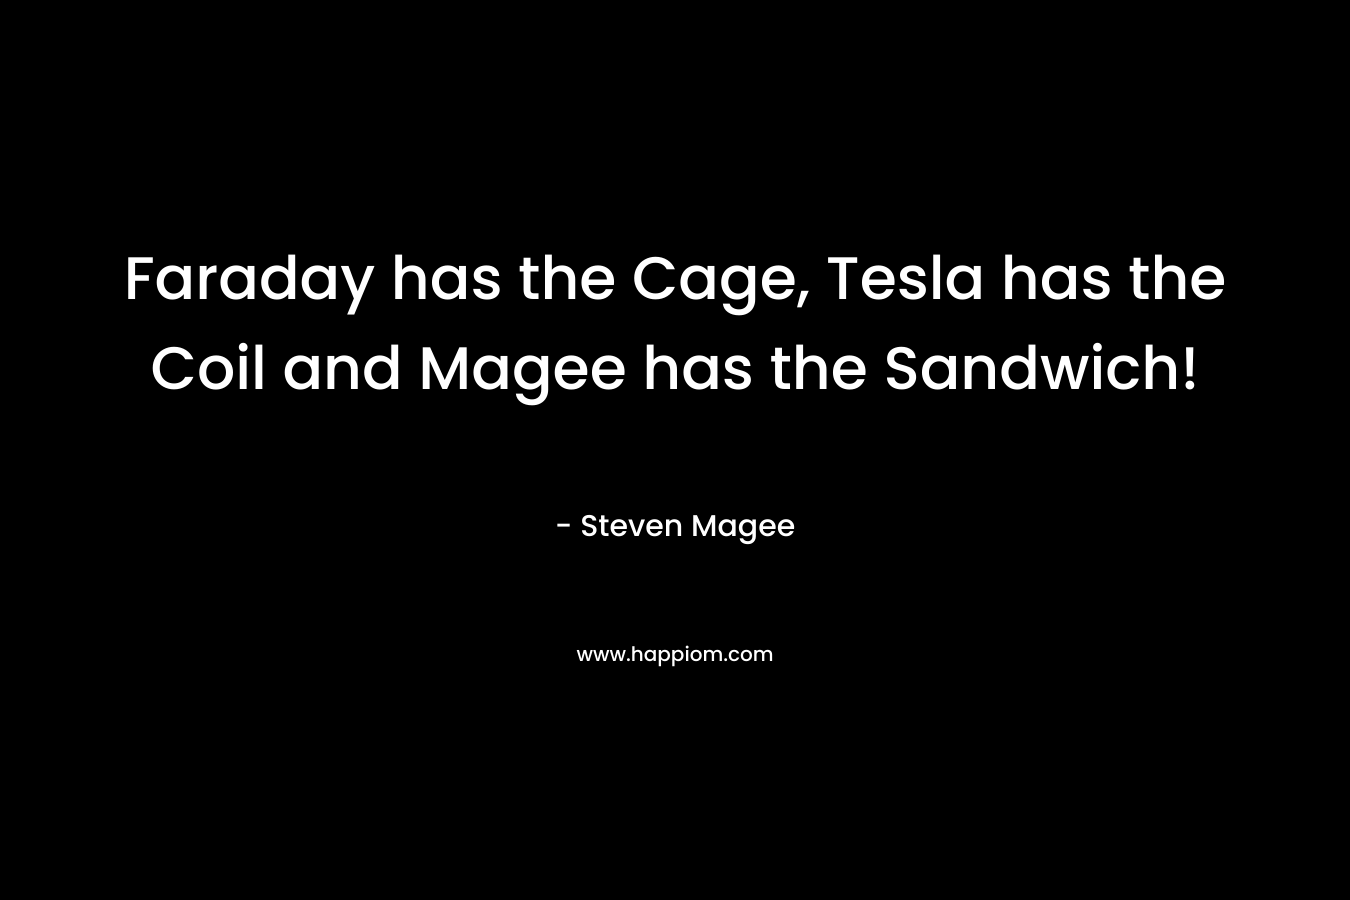 Faraday has the Cage, Tesla has the Coil and Magee has the Sandwich! – Steven Magee